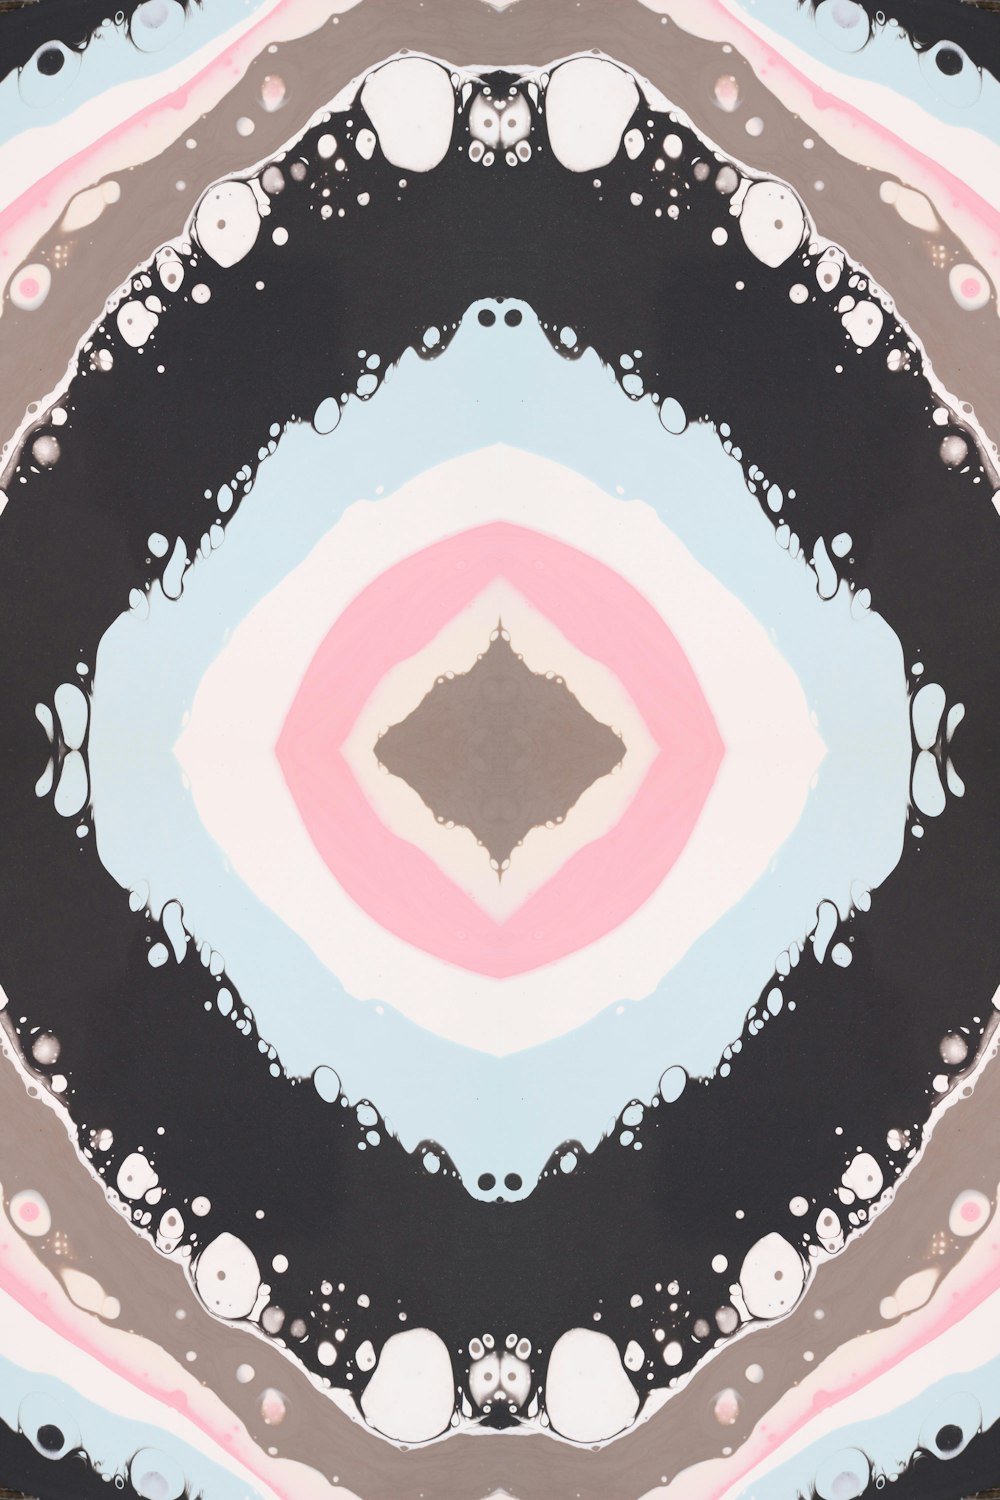 a circular painting with a black, white, pink, and blue design